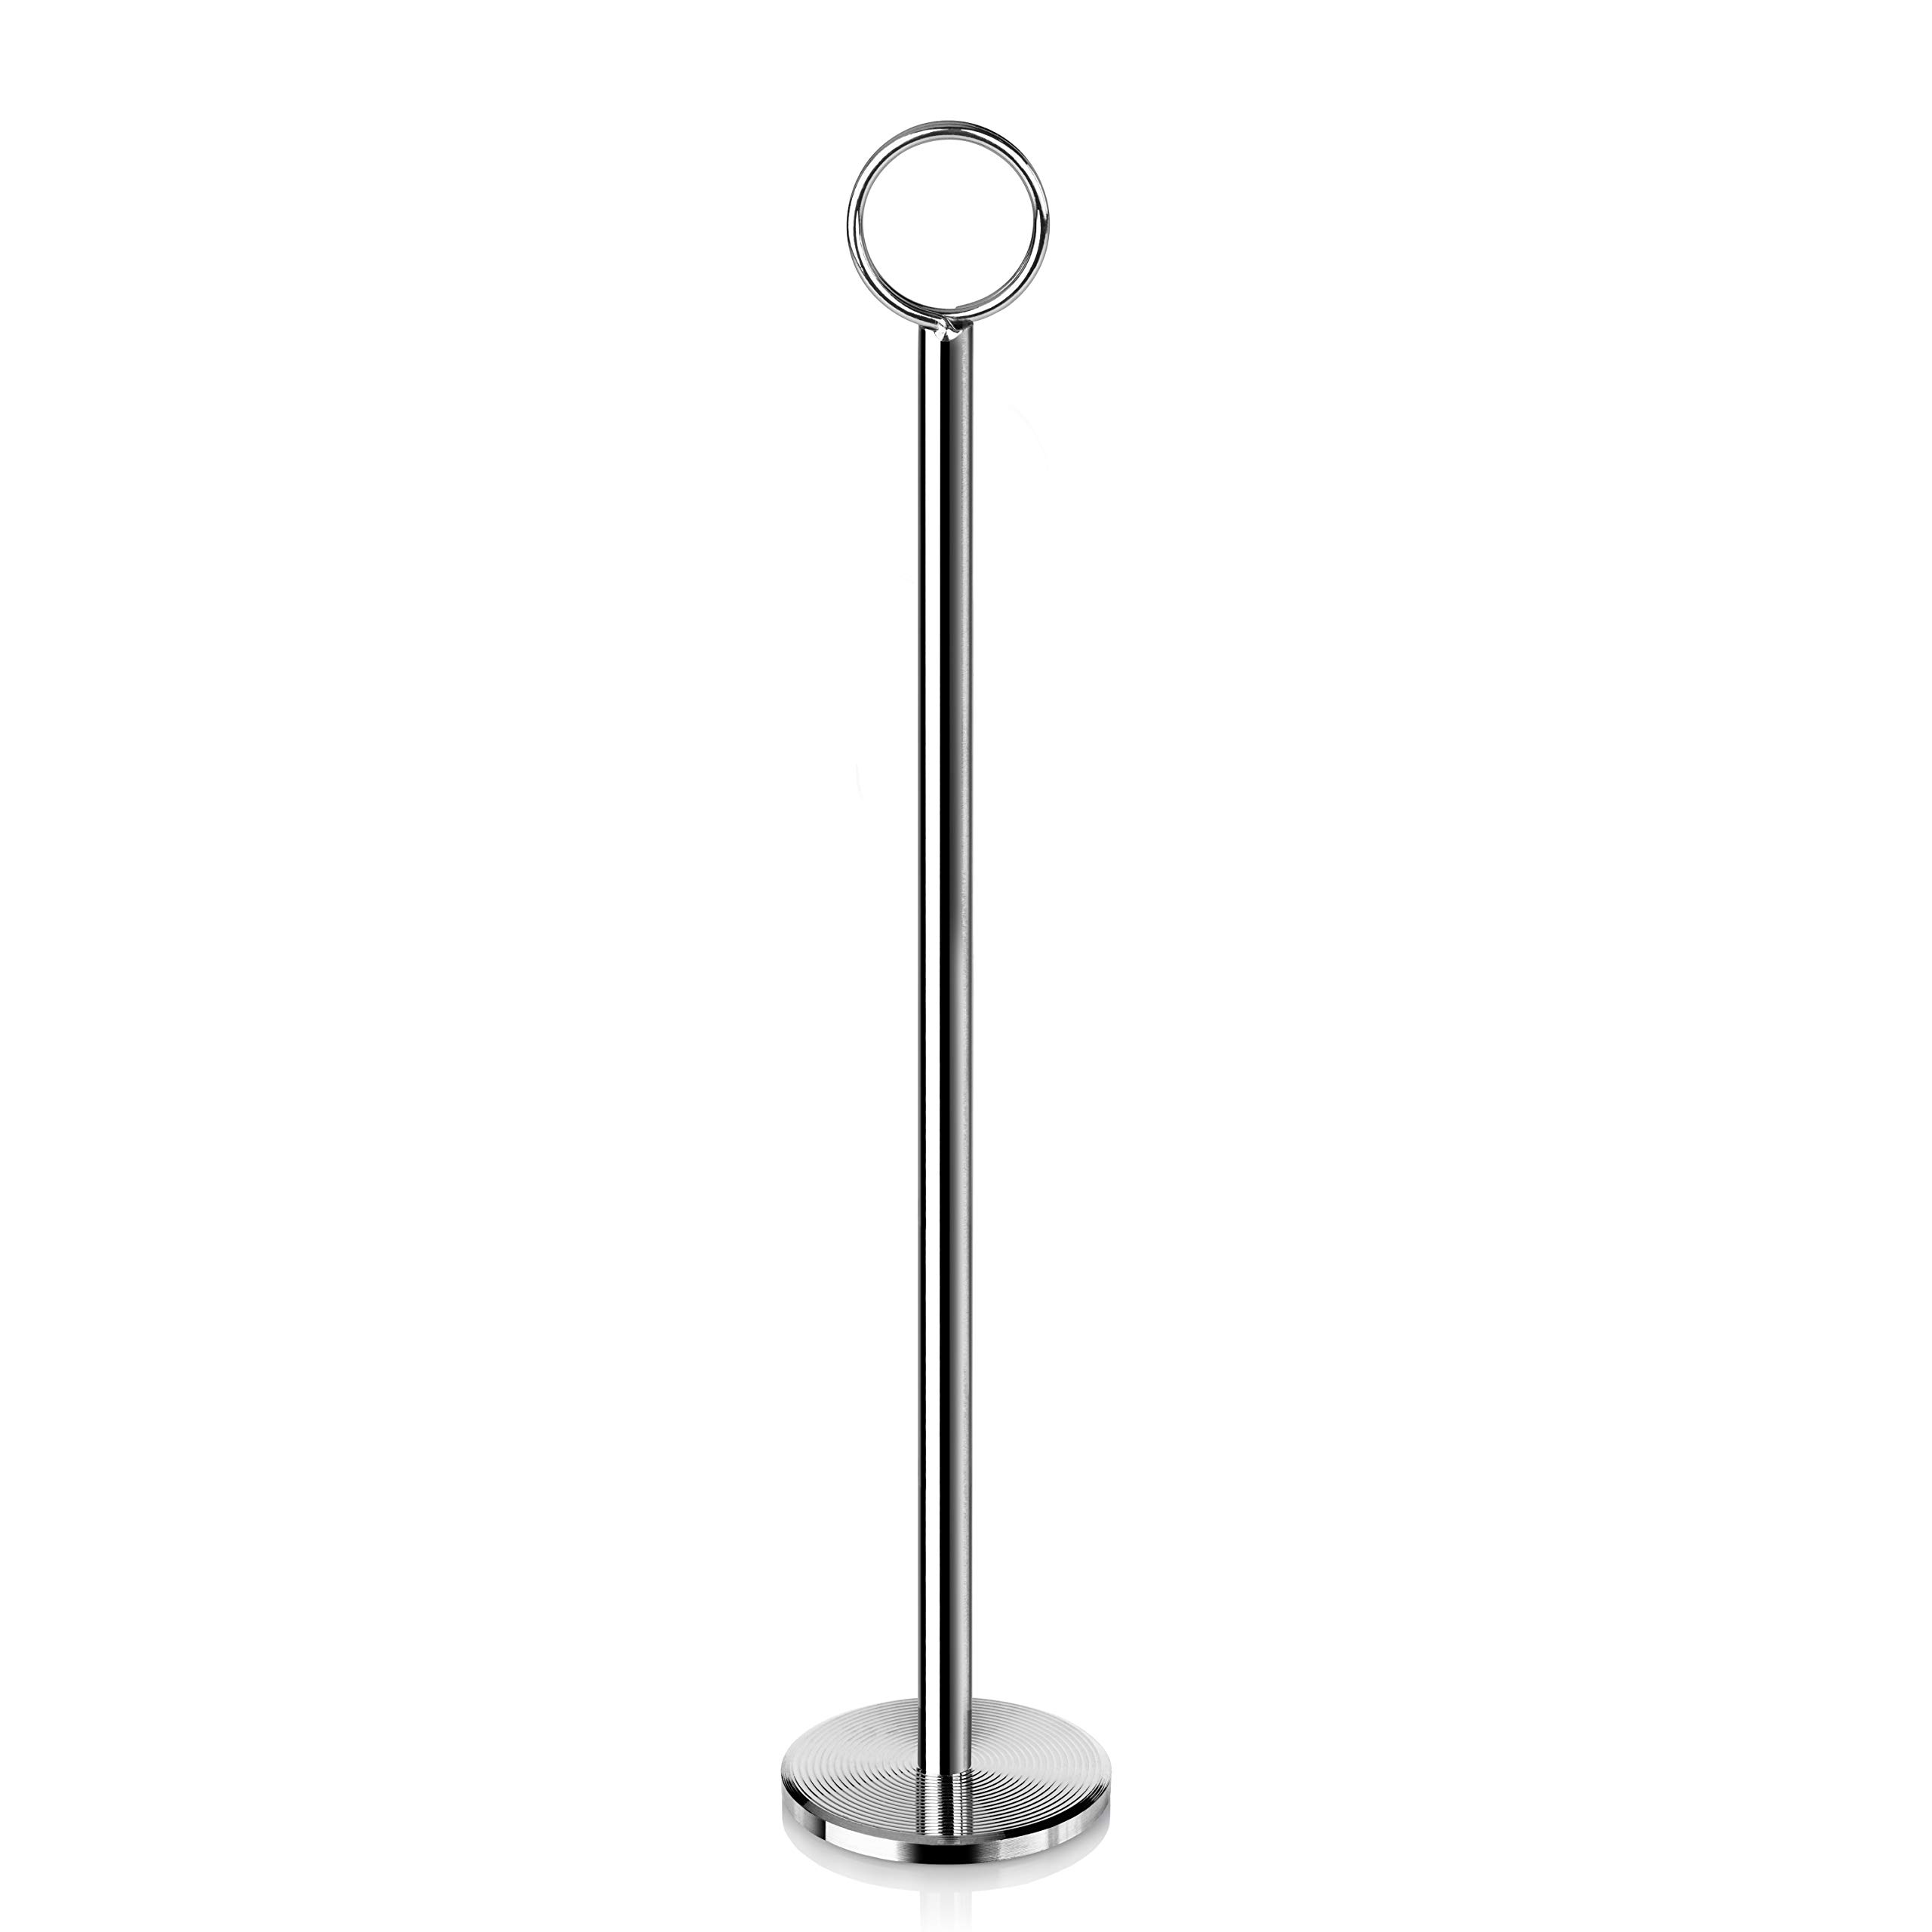 New Star Foodservice 23244 Ring-Clip Table Number Holder/Number Stand/Place Card Holder, 12-Inch, Set of 12